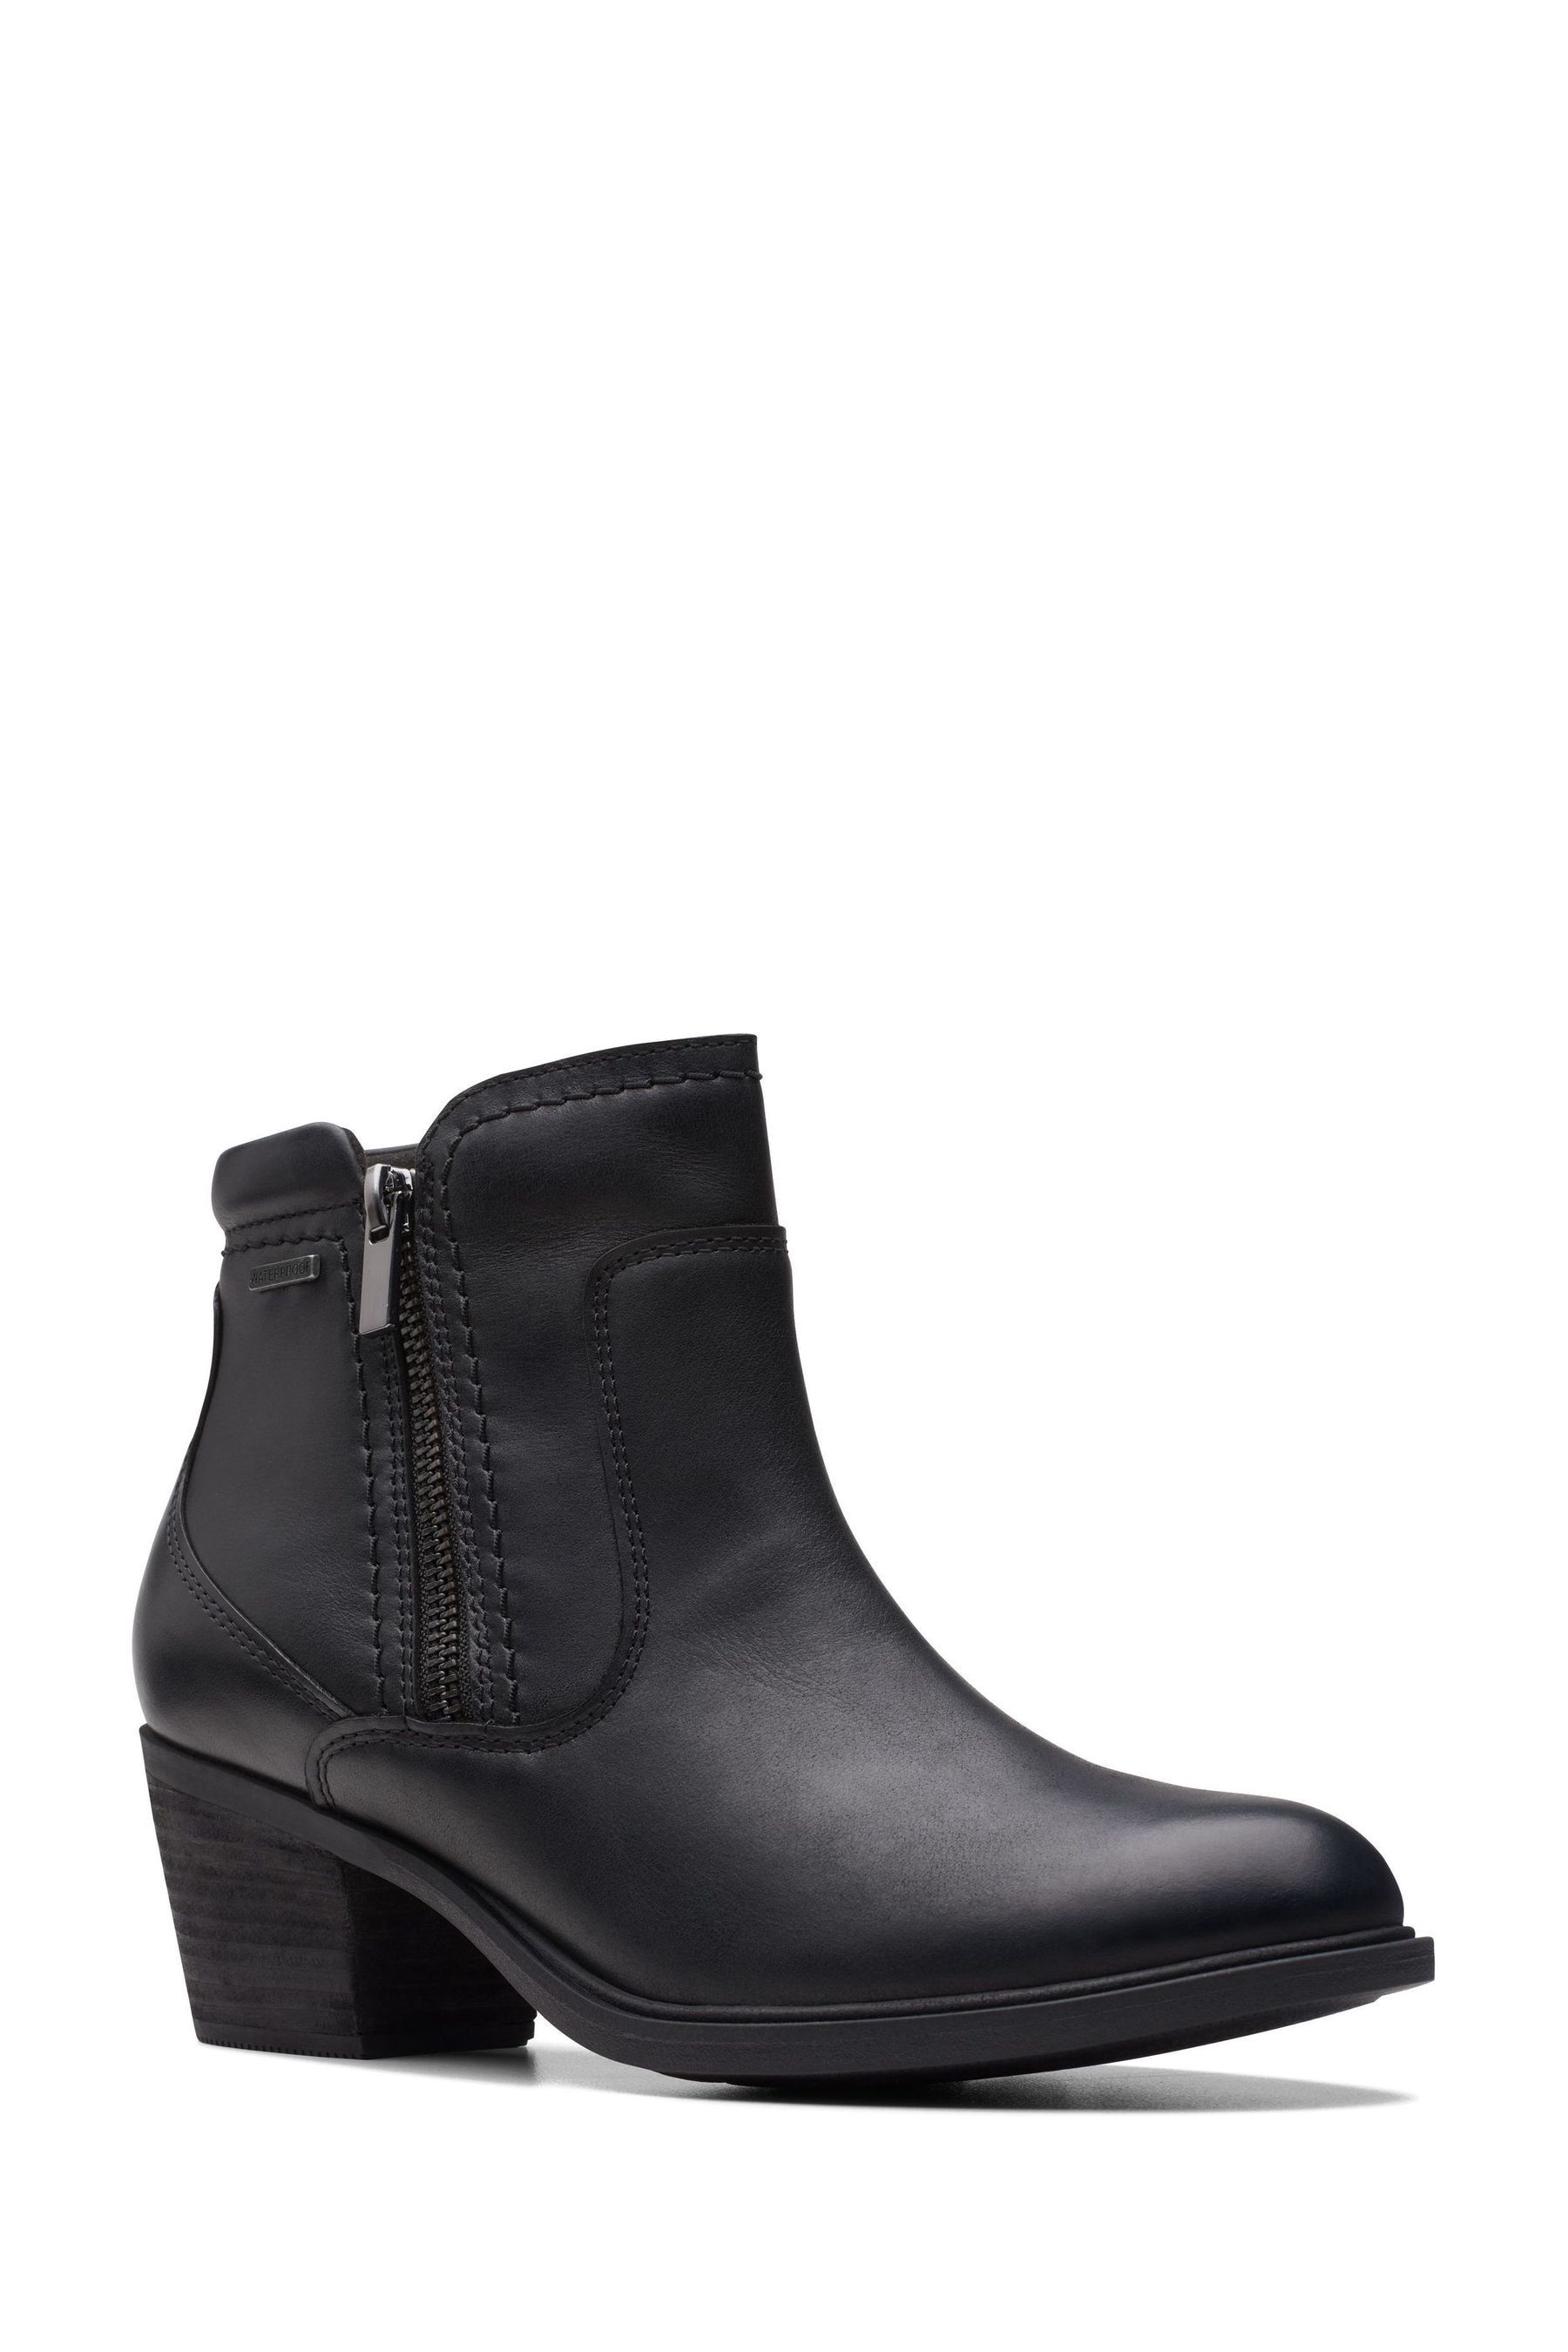 Buy Clarks Black Leather Neva Western Boots from the Next UK online shop